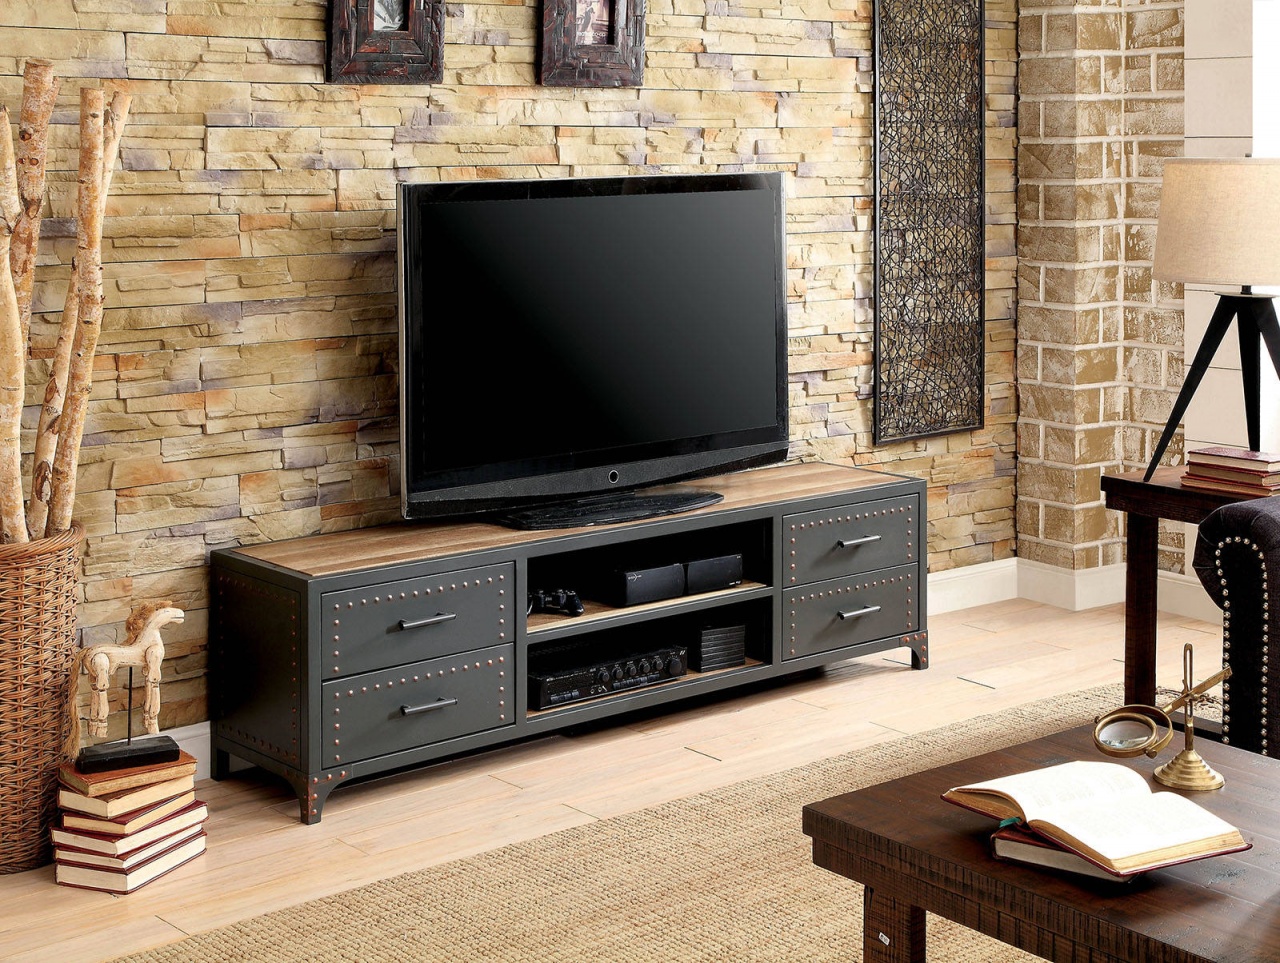 65 Inch Tv Over Fireplace Best Of Espresso Electric Fireplace Tv Stand – Fireplace Ideas From